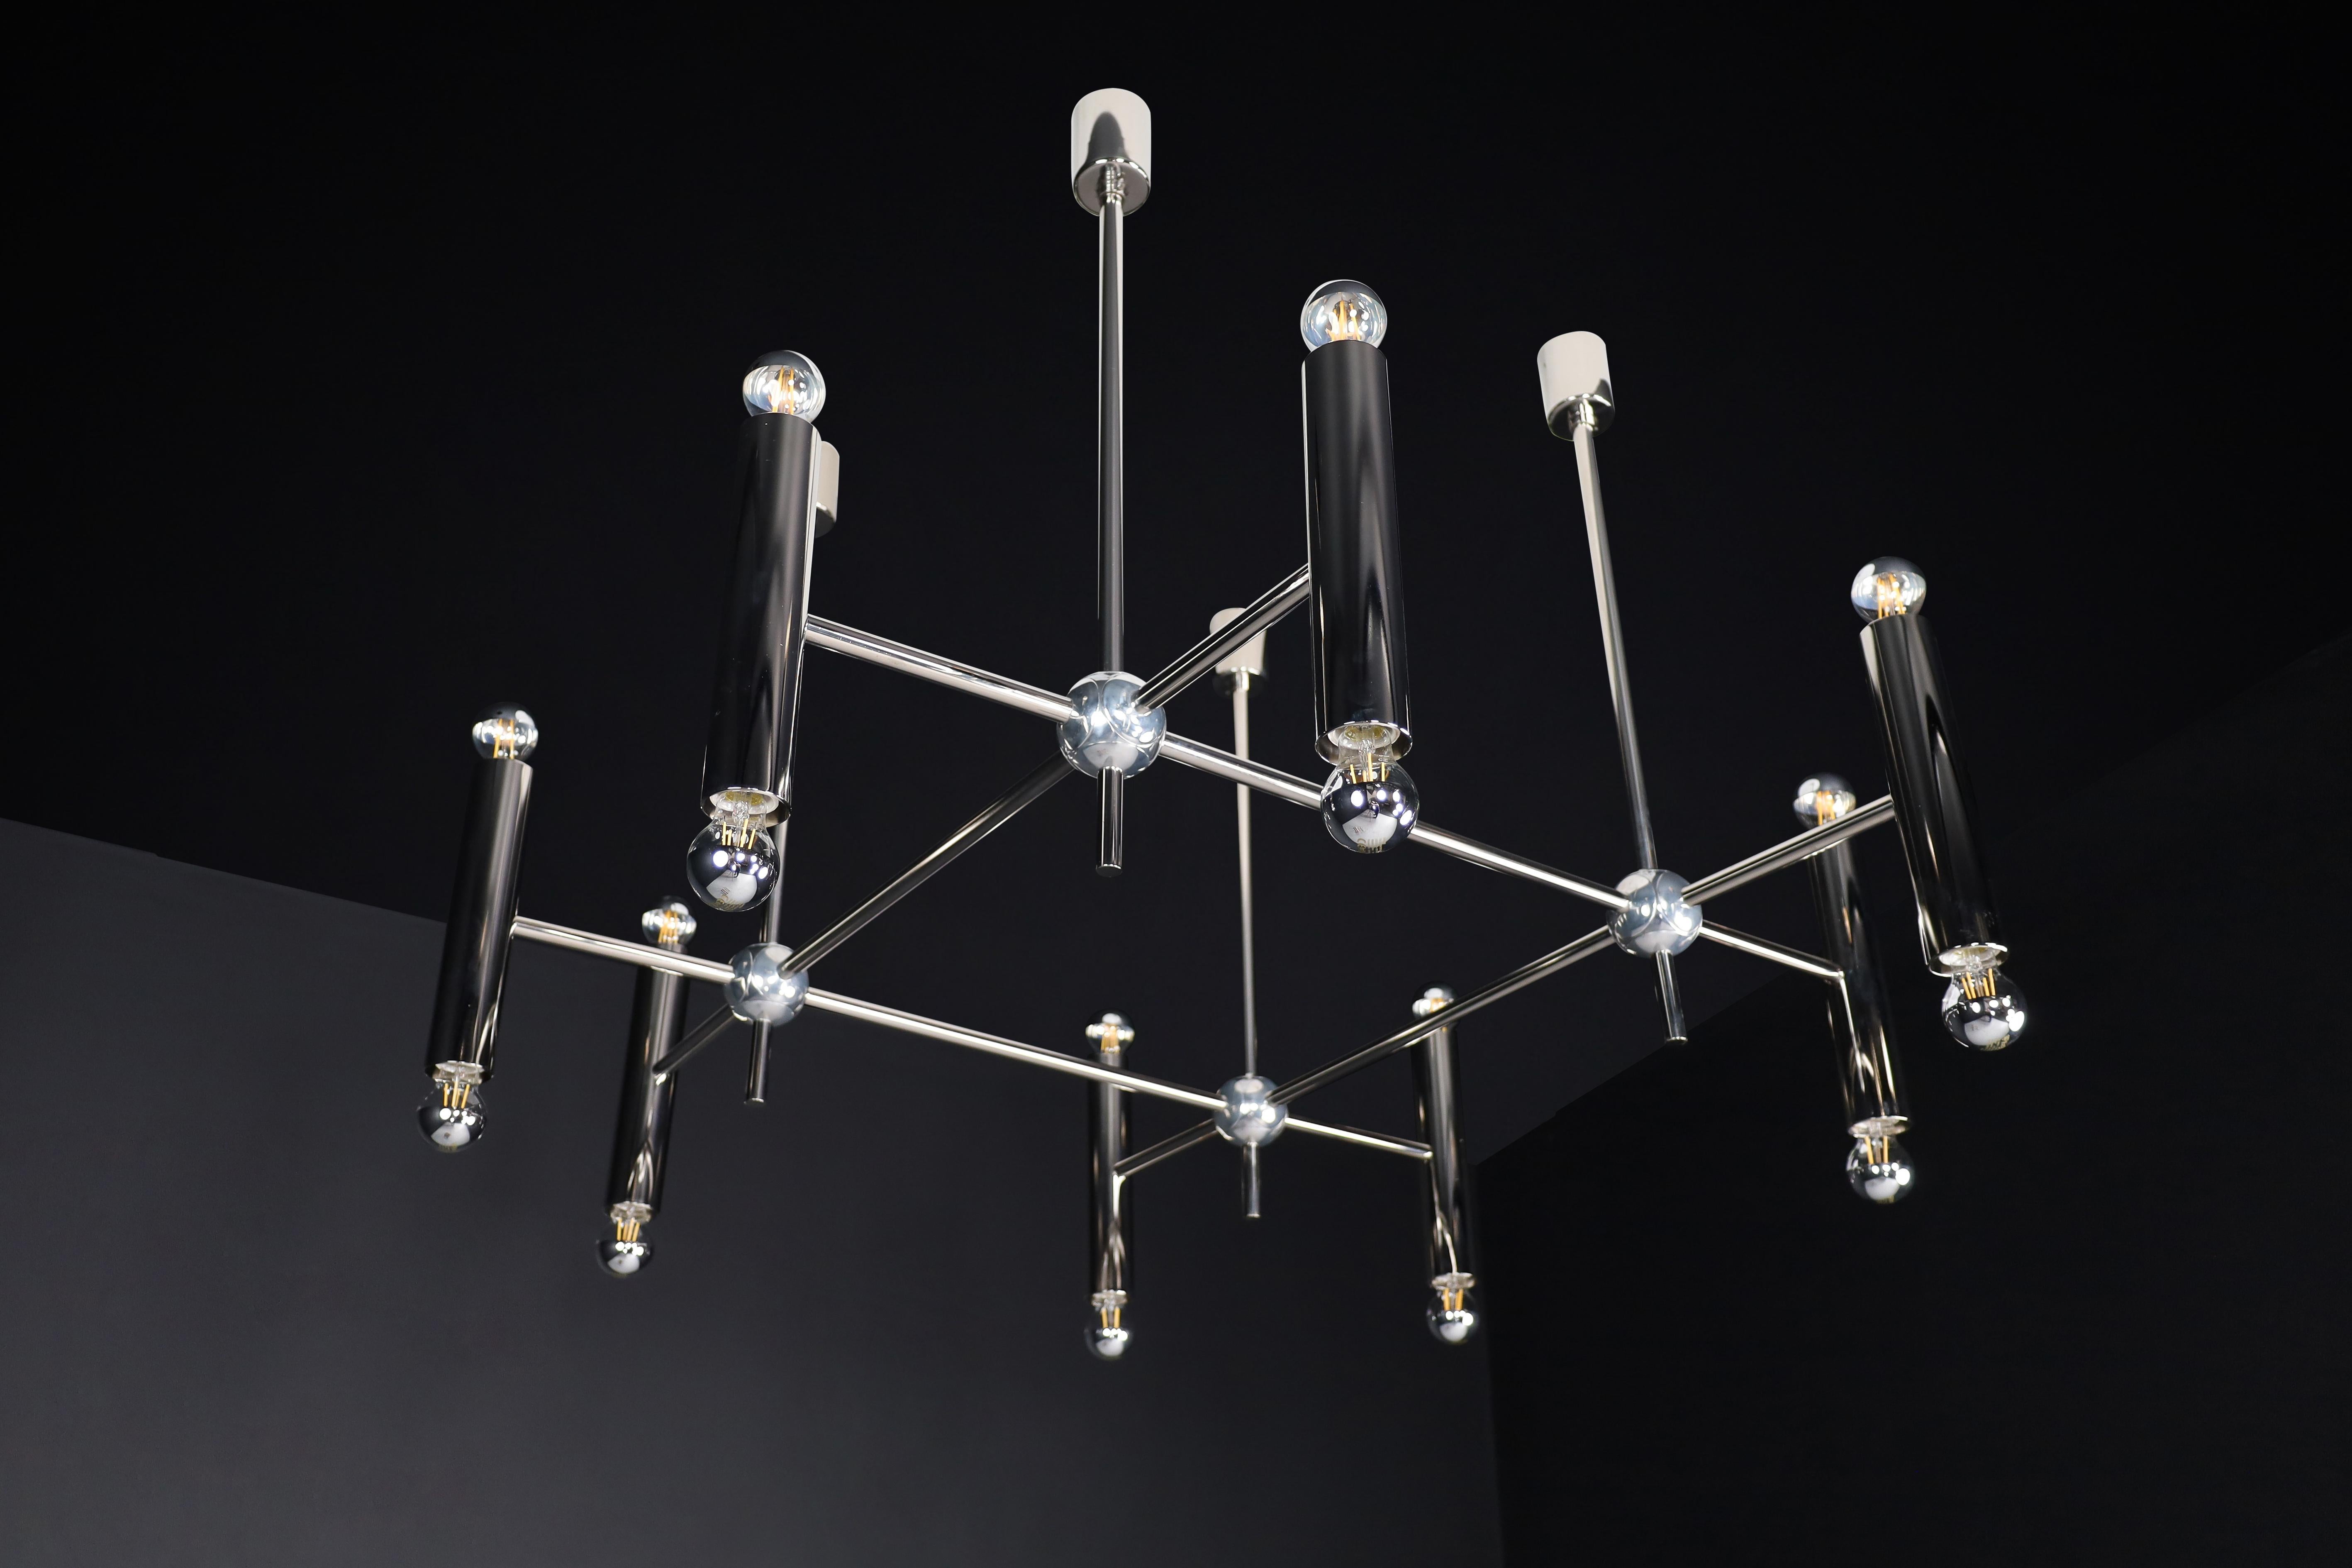 Grande Chandelier in Polished Steel with 16 Lights Germany 1960s.

This is a magnificent midcentury chandelier made in Germany during the 1960s. The chandelier features a polished steel frame and eight tubes held together by steel. Each tube has